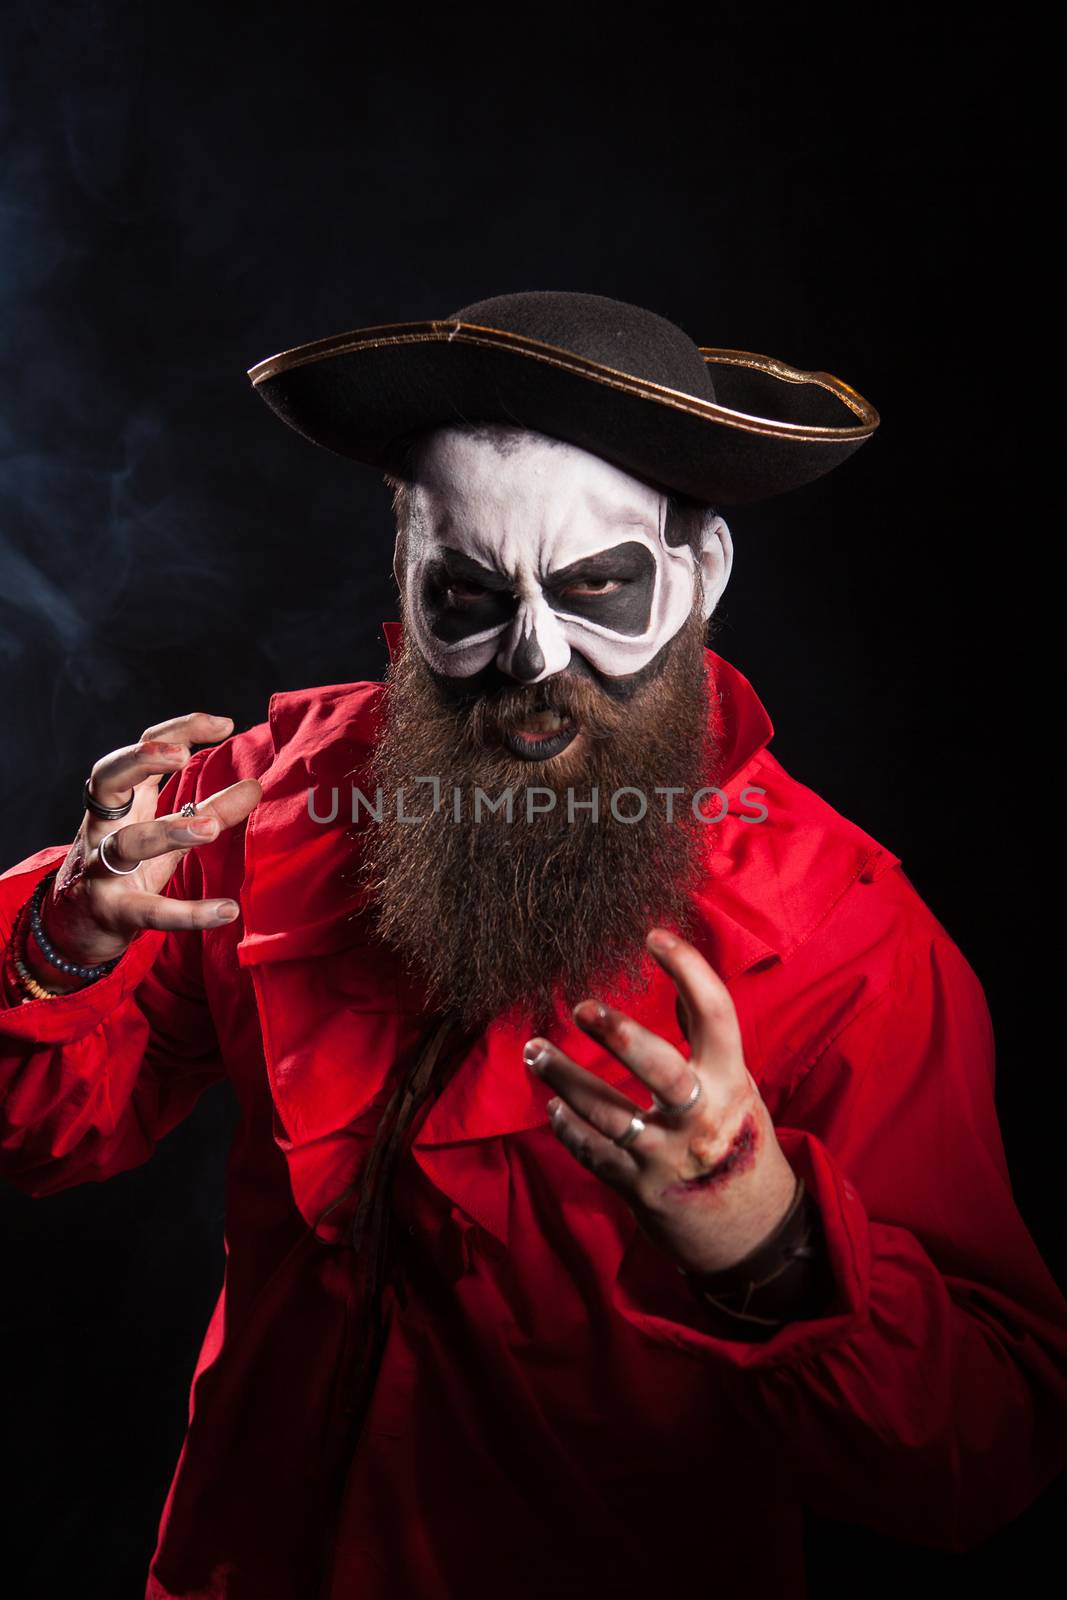 Actor with long beard and hat dressed up like a pirate over black background. Halloween costume.